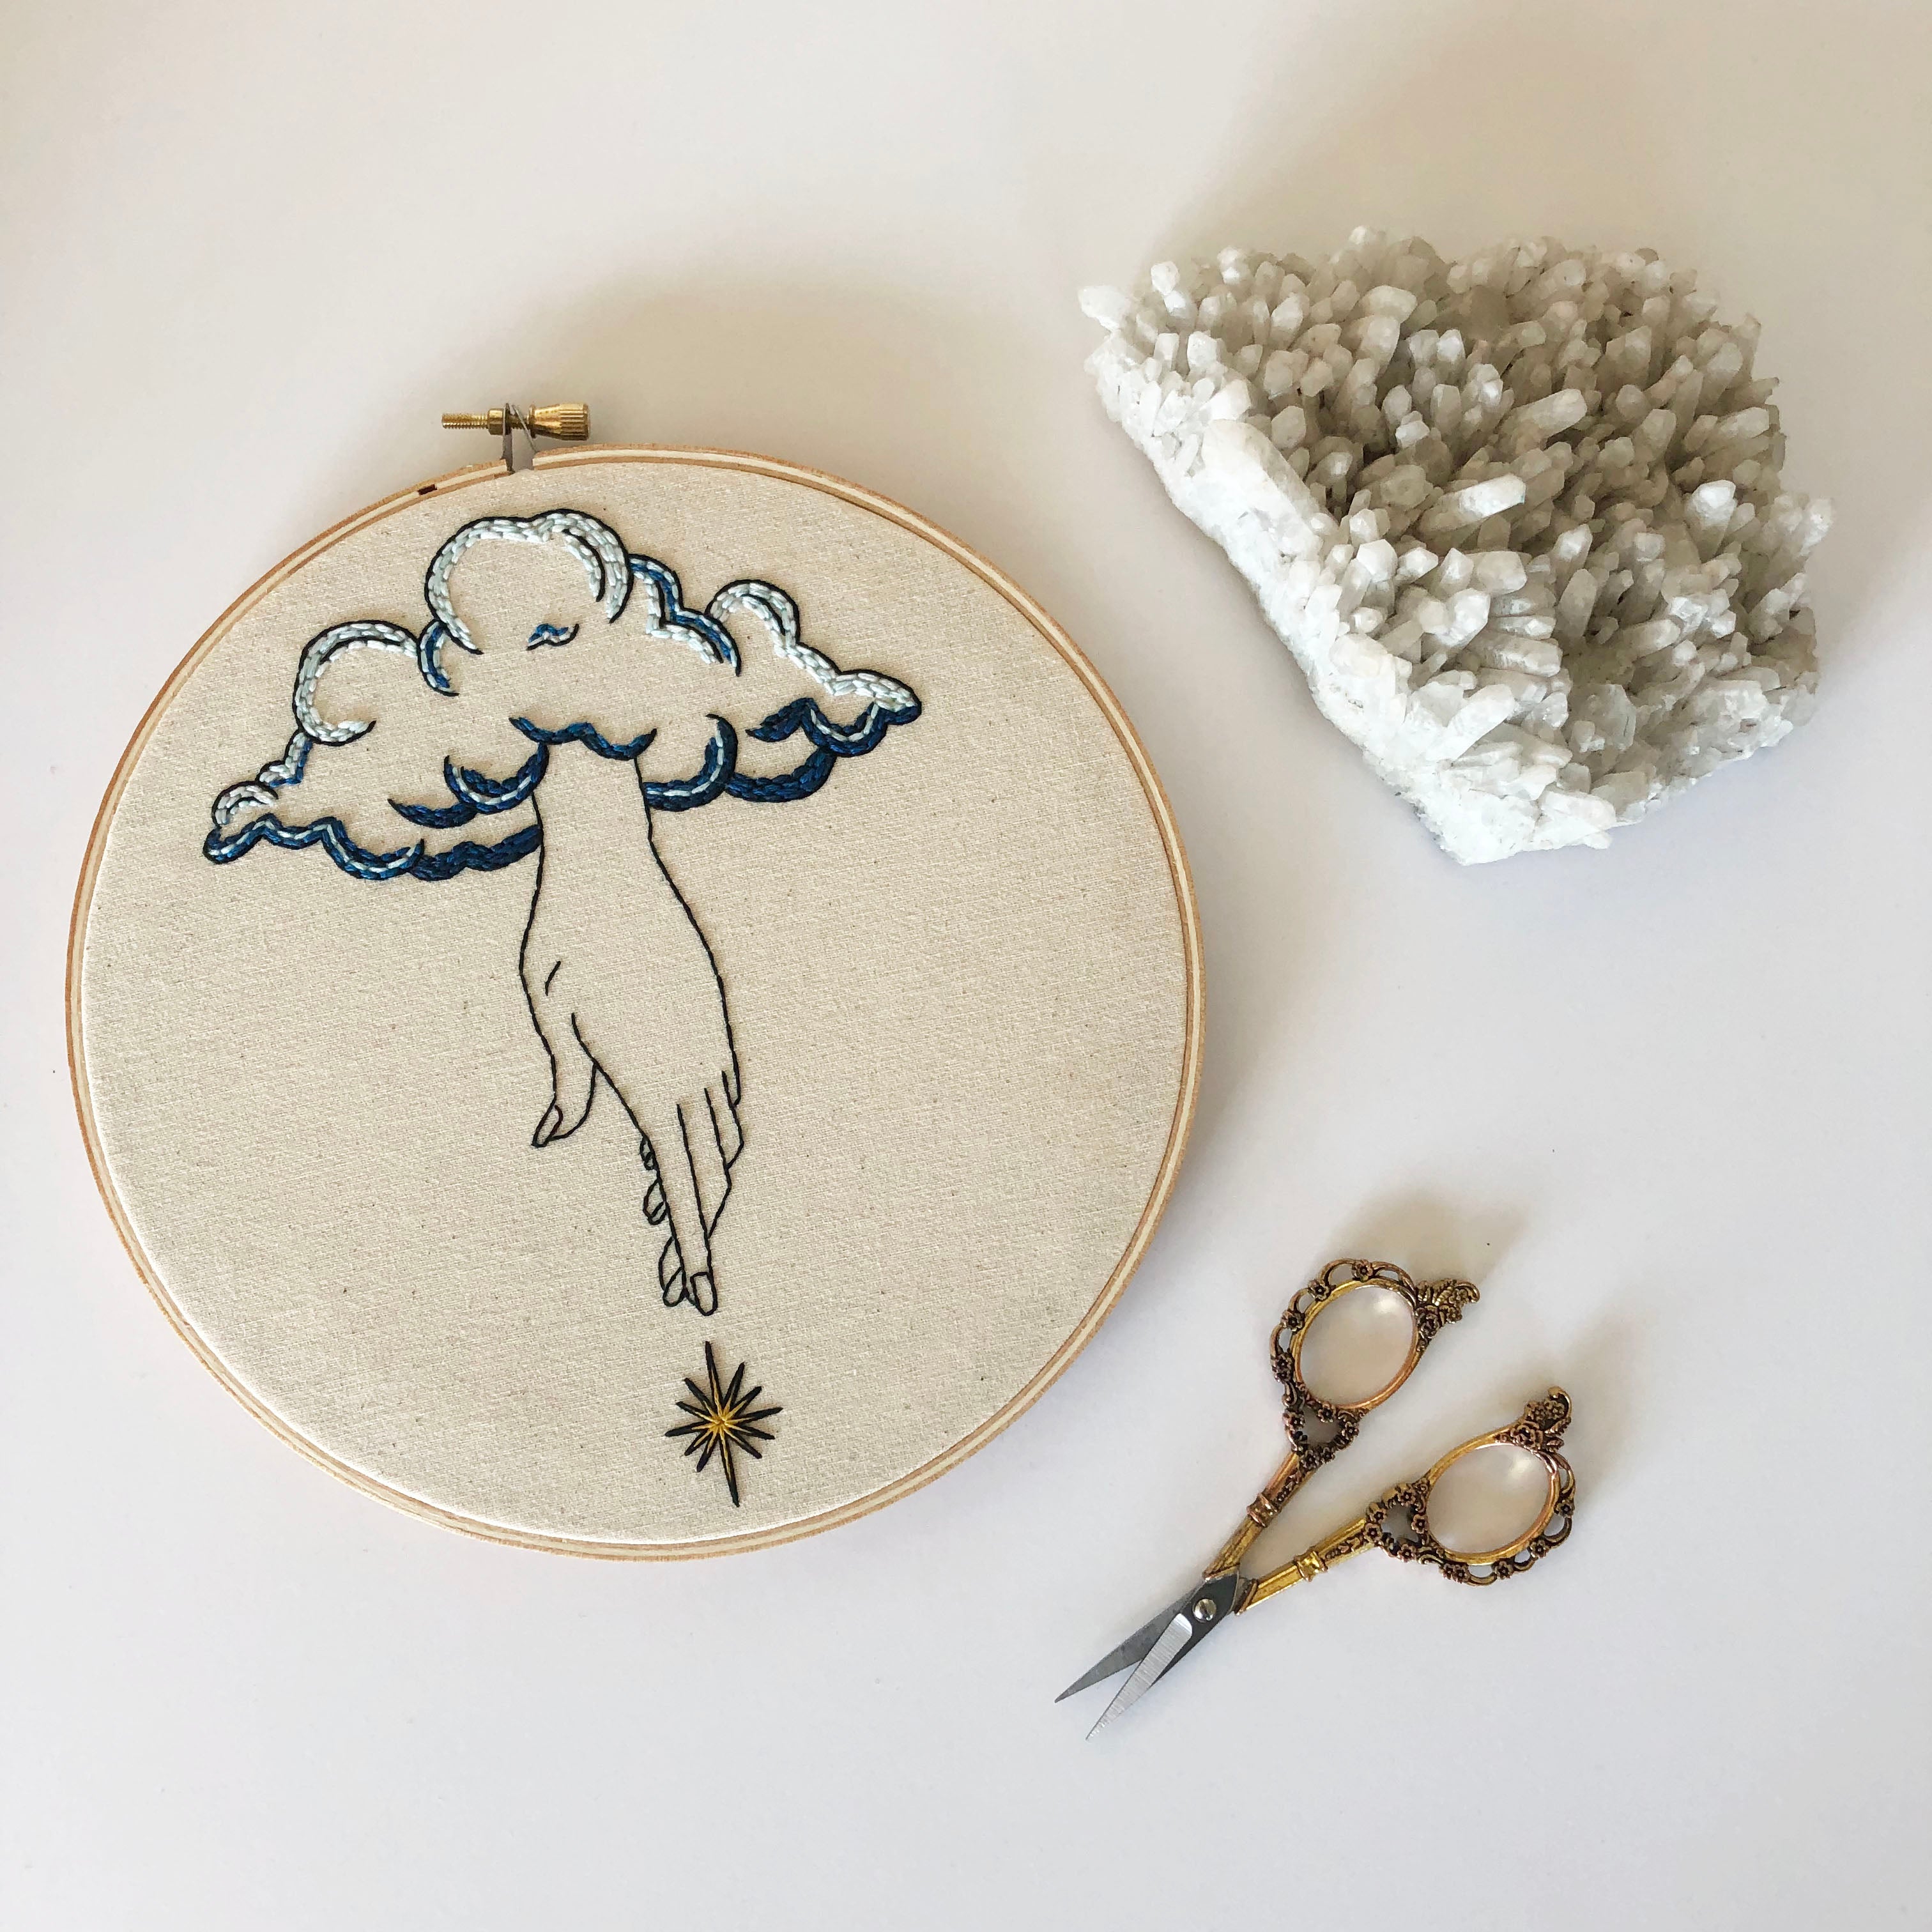 Celestial Embroidery Stick and Stitch Packs